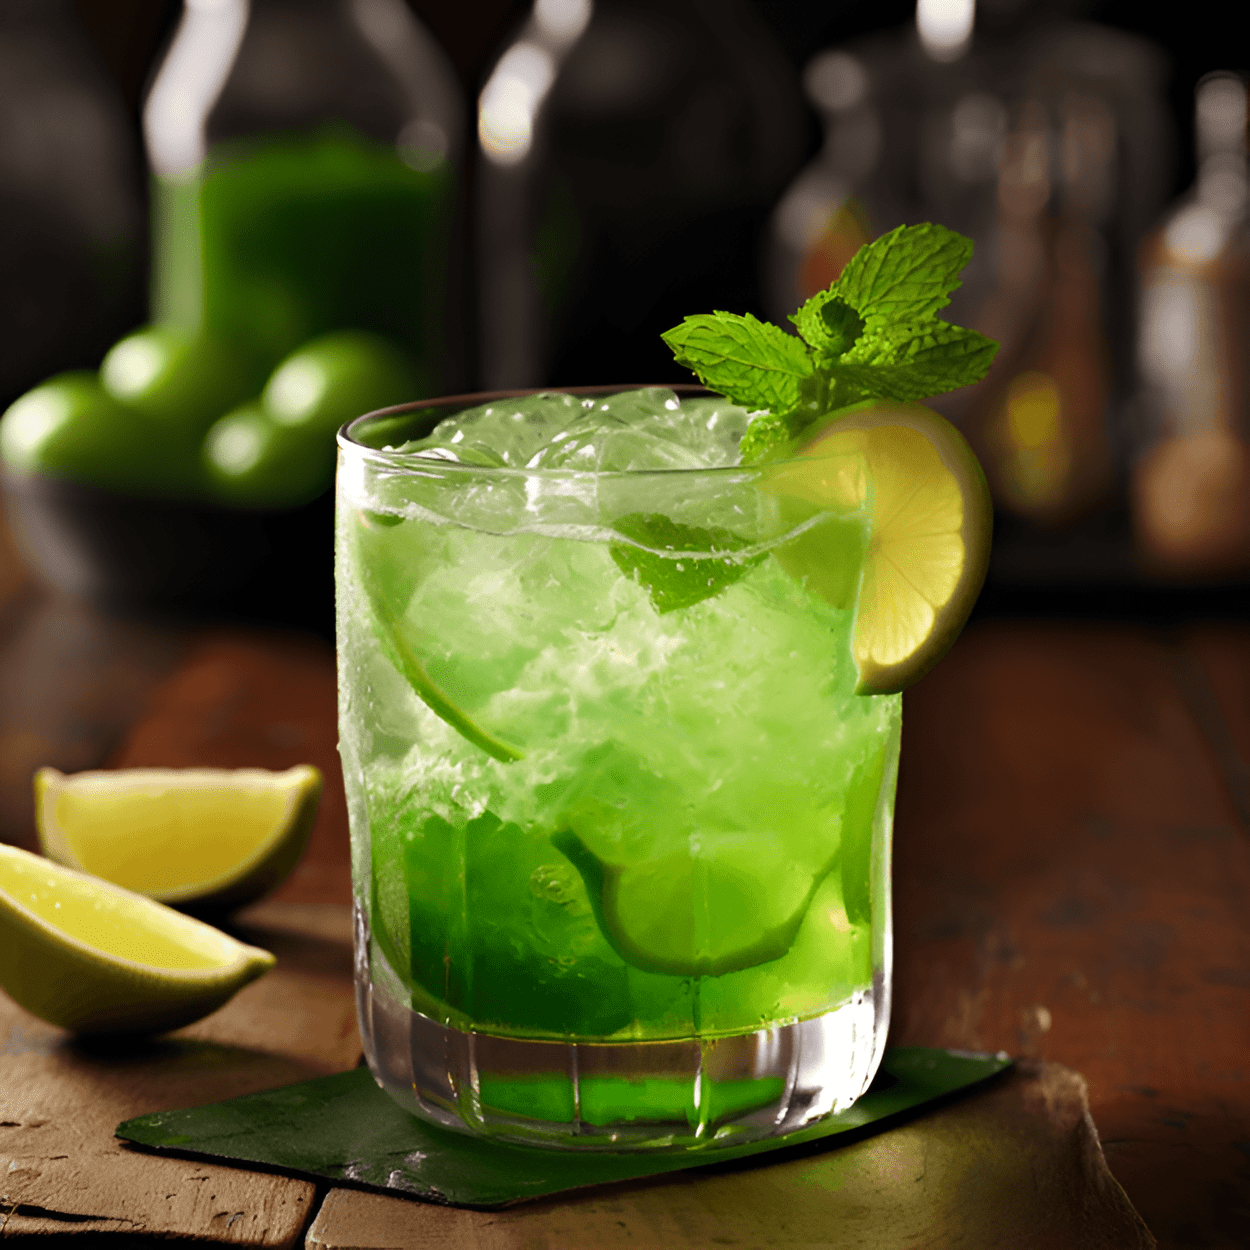 Green River Cocktail Recipe - The Green River cocktail is a delightful balance of sweet and sour. The tartness of the lime juice is perfectly offset by the sweetness of the melon liqueur, while the vodka adds a crisp, clean finish. It's a refreshing, light, and invigorating cocktail with a fruity undertone.